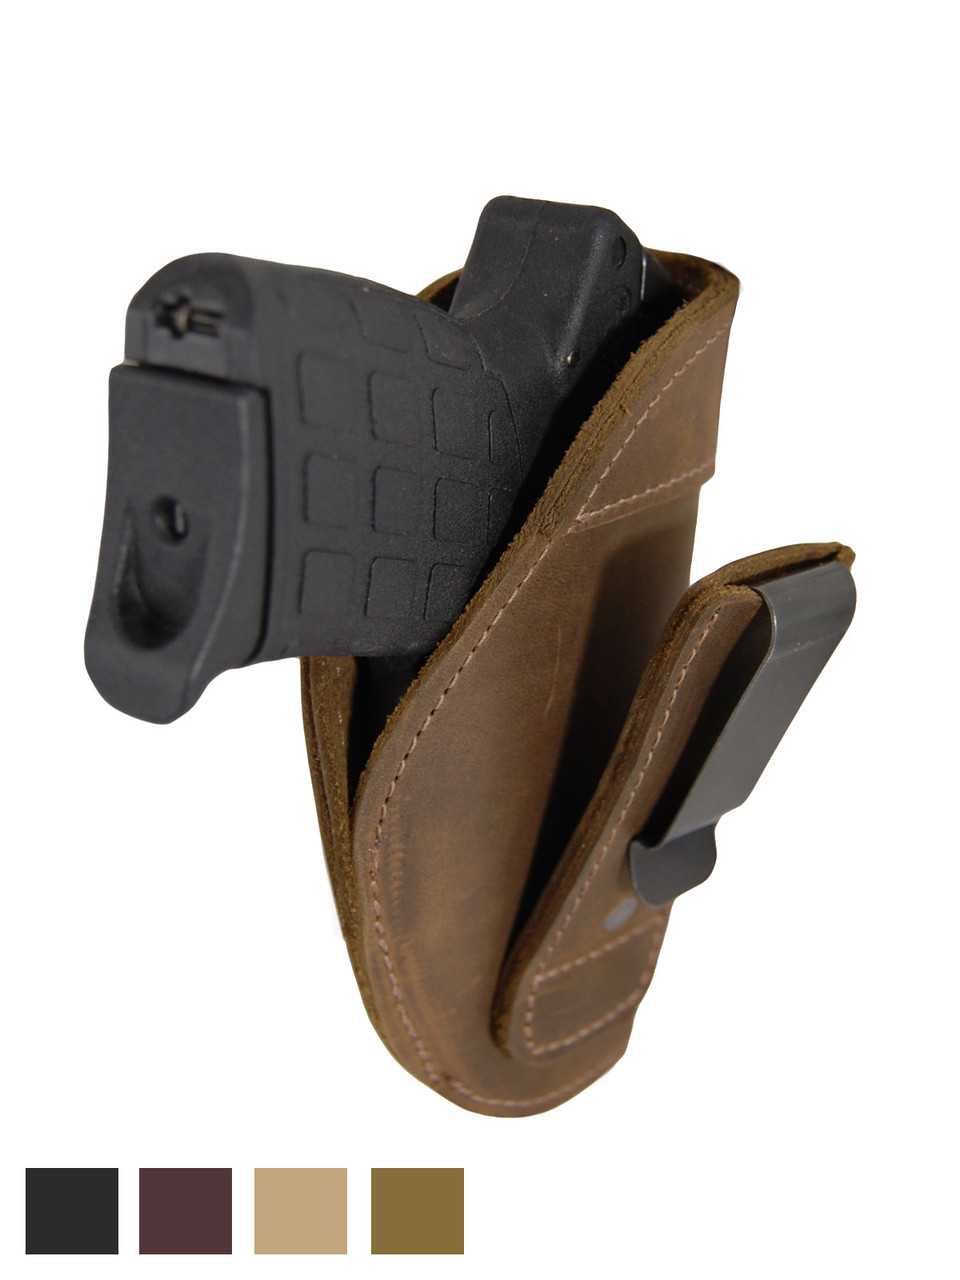 Leather Tuckable IWB Holster for Small 380, Ultra Compact 9mm 40 45 Pistols